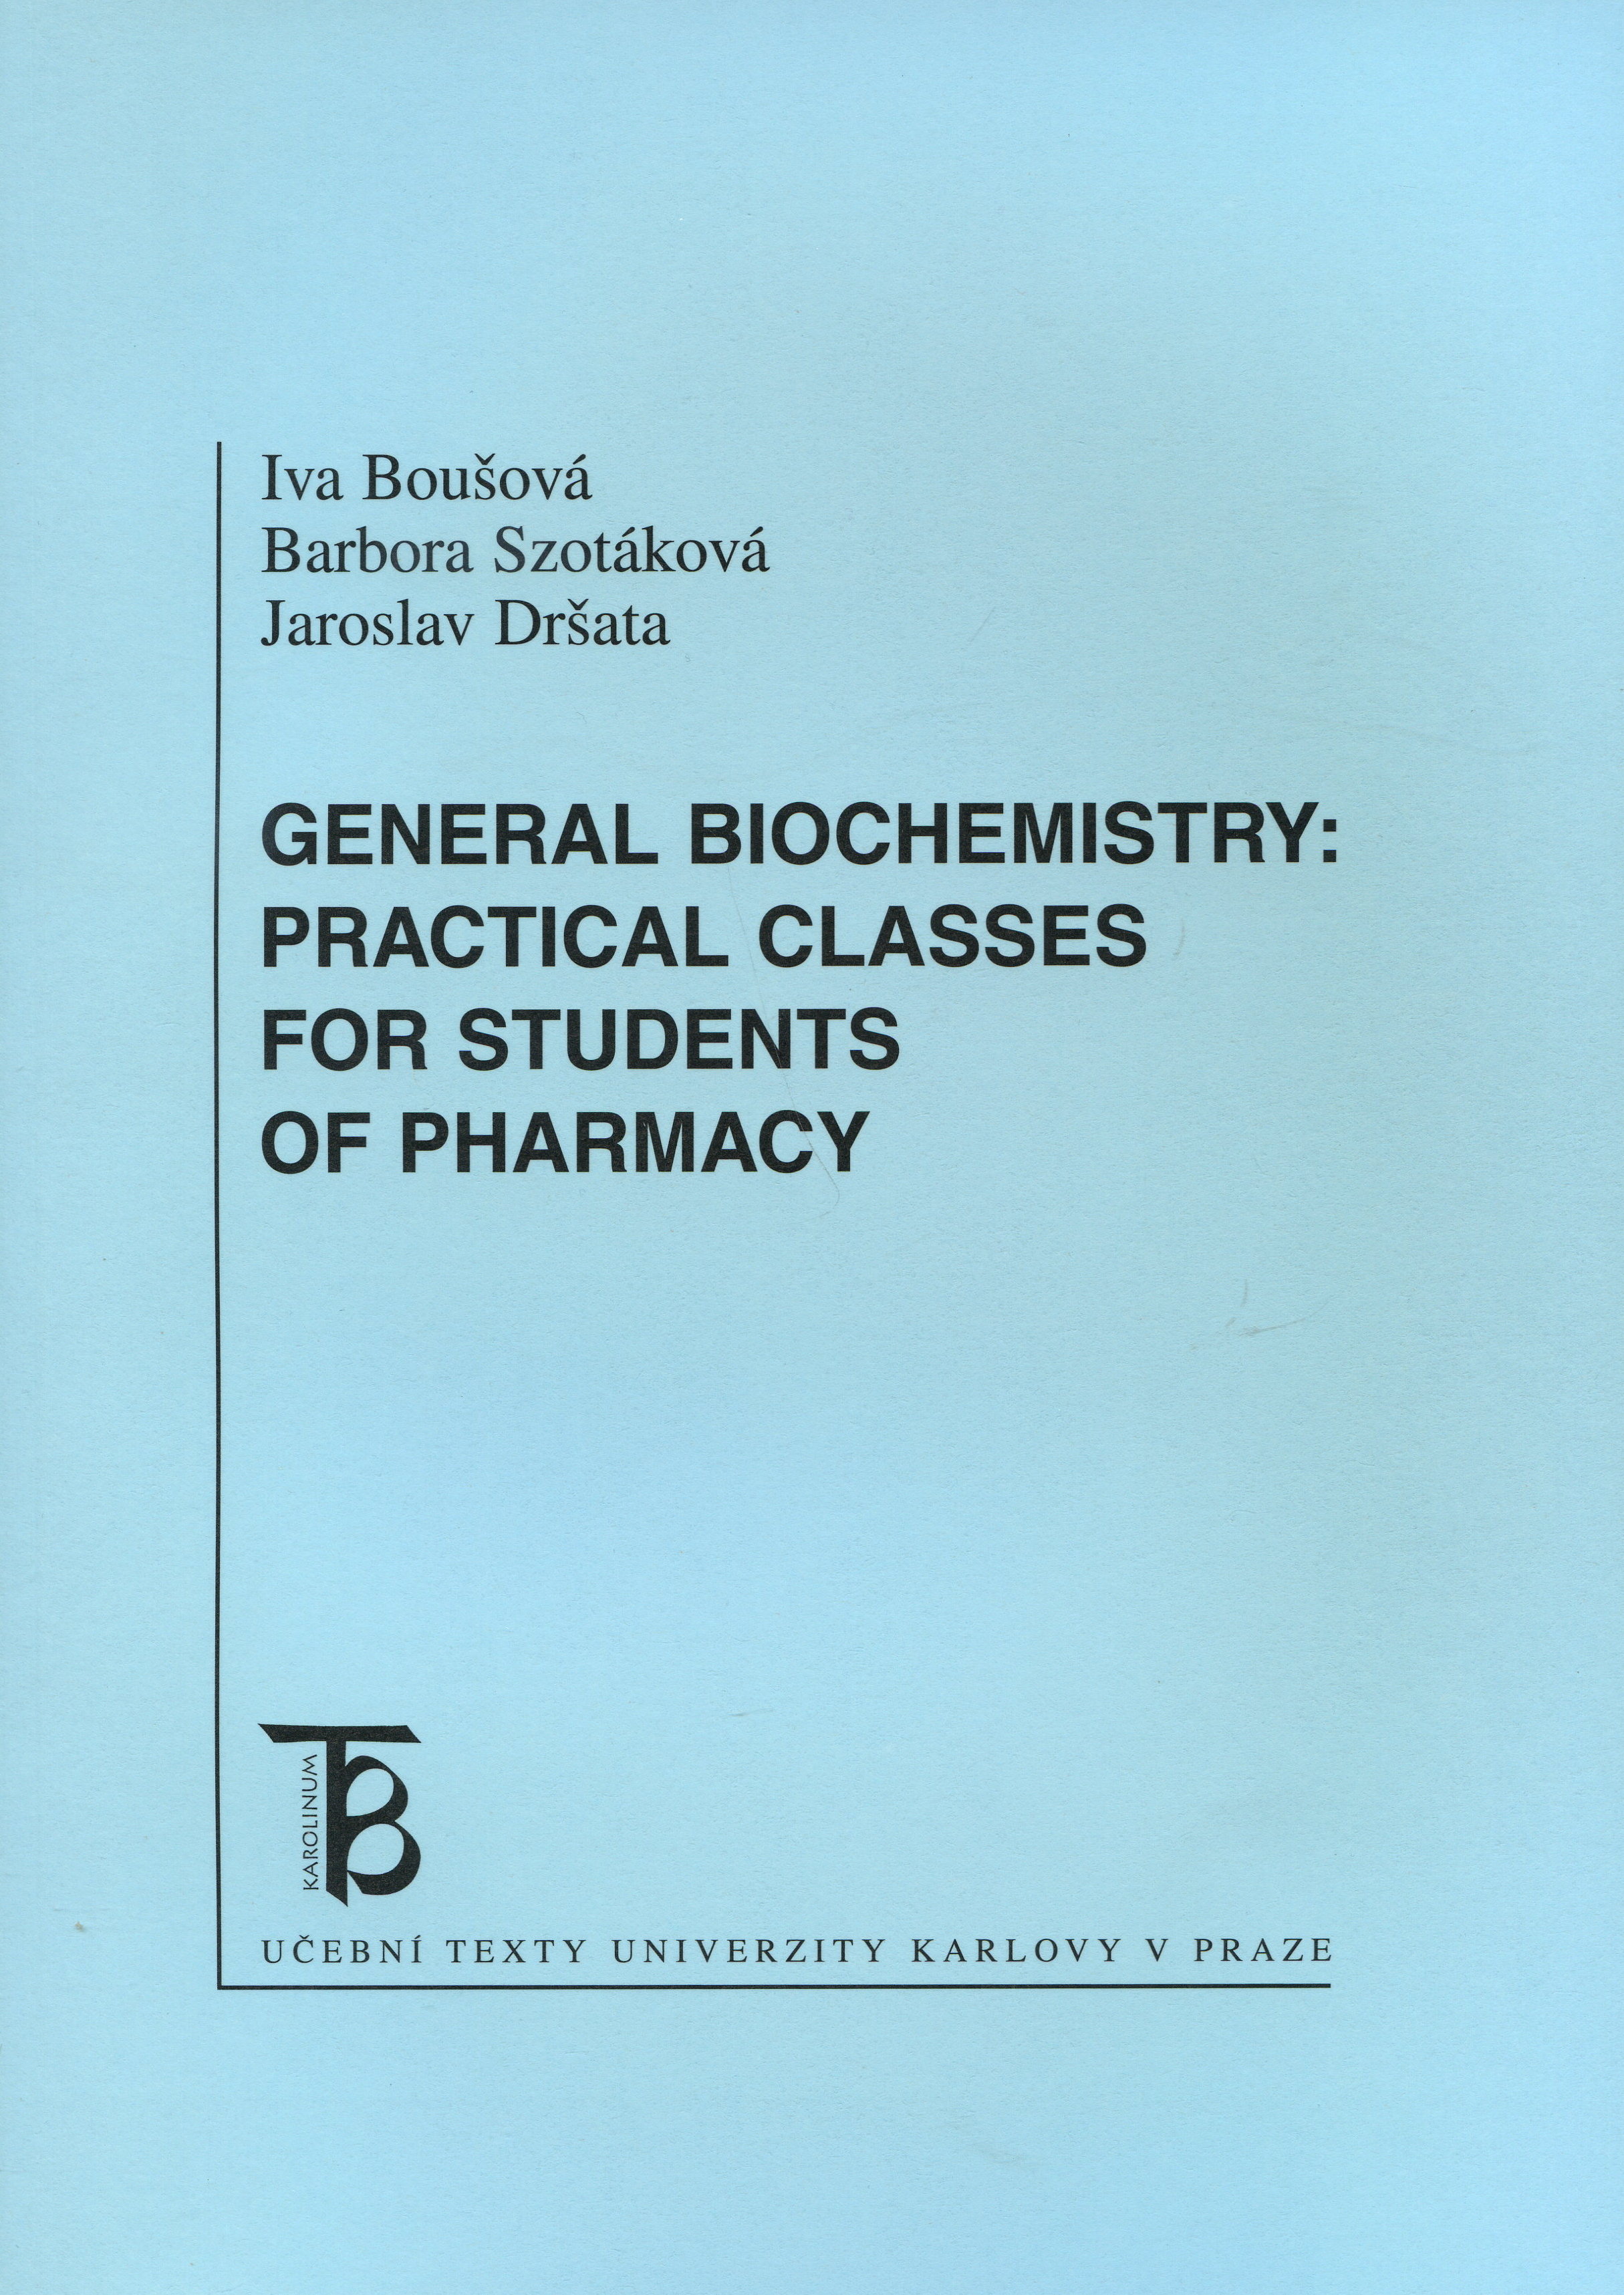 General Biochemistry: Practical Classes For Students of Pharmacy